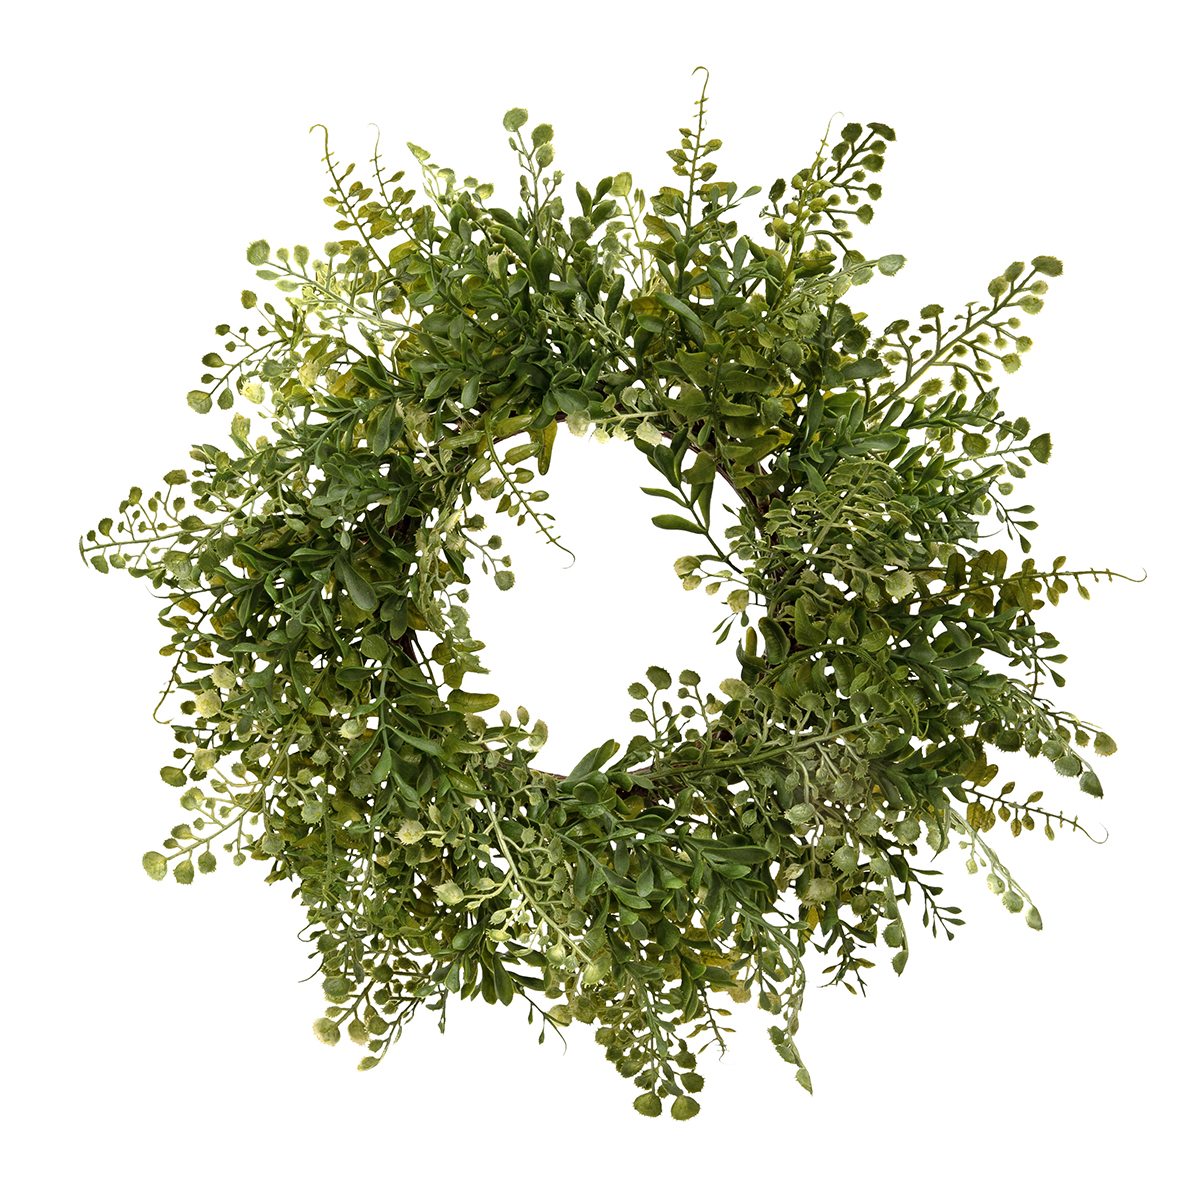 WREATH MIXED MAIDENHAIR FERN 16IN (INNER RING 5.5IN) - Click Image to Close